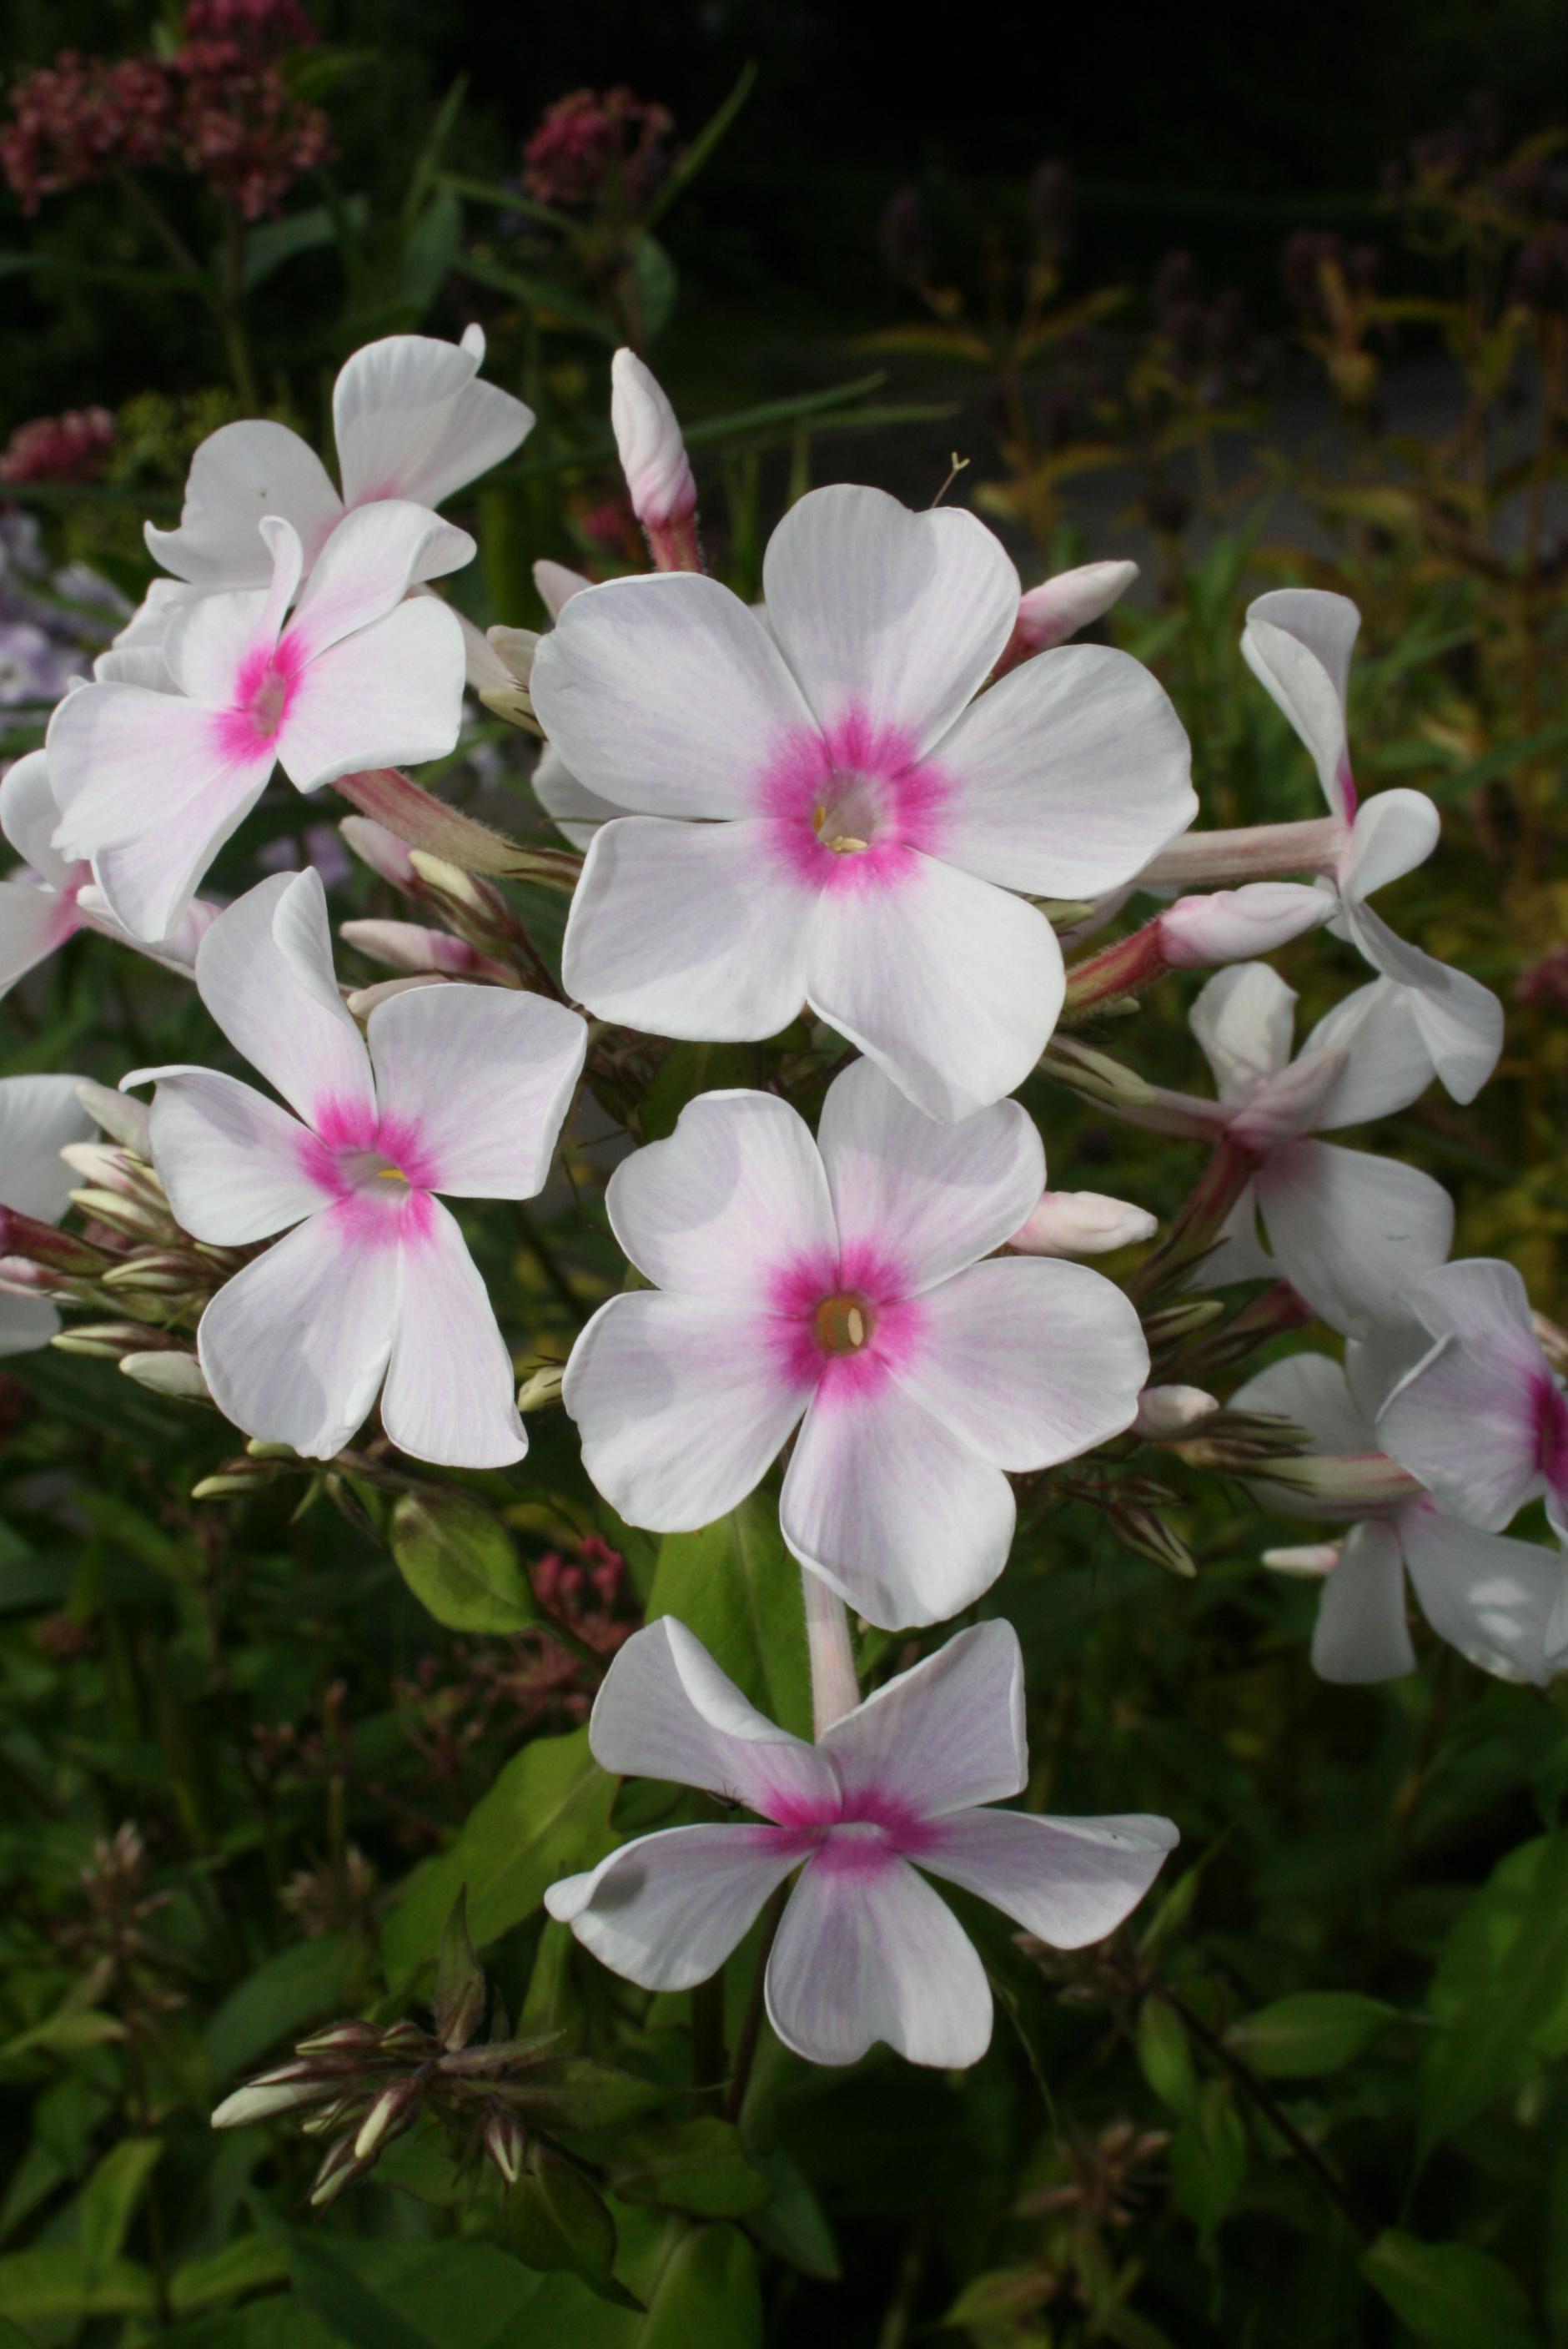 White flower with pink center yellow stigma and anthers, pink-white center and green leaves.